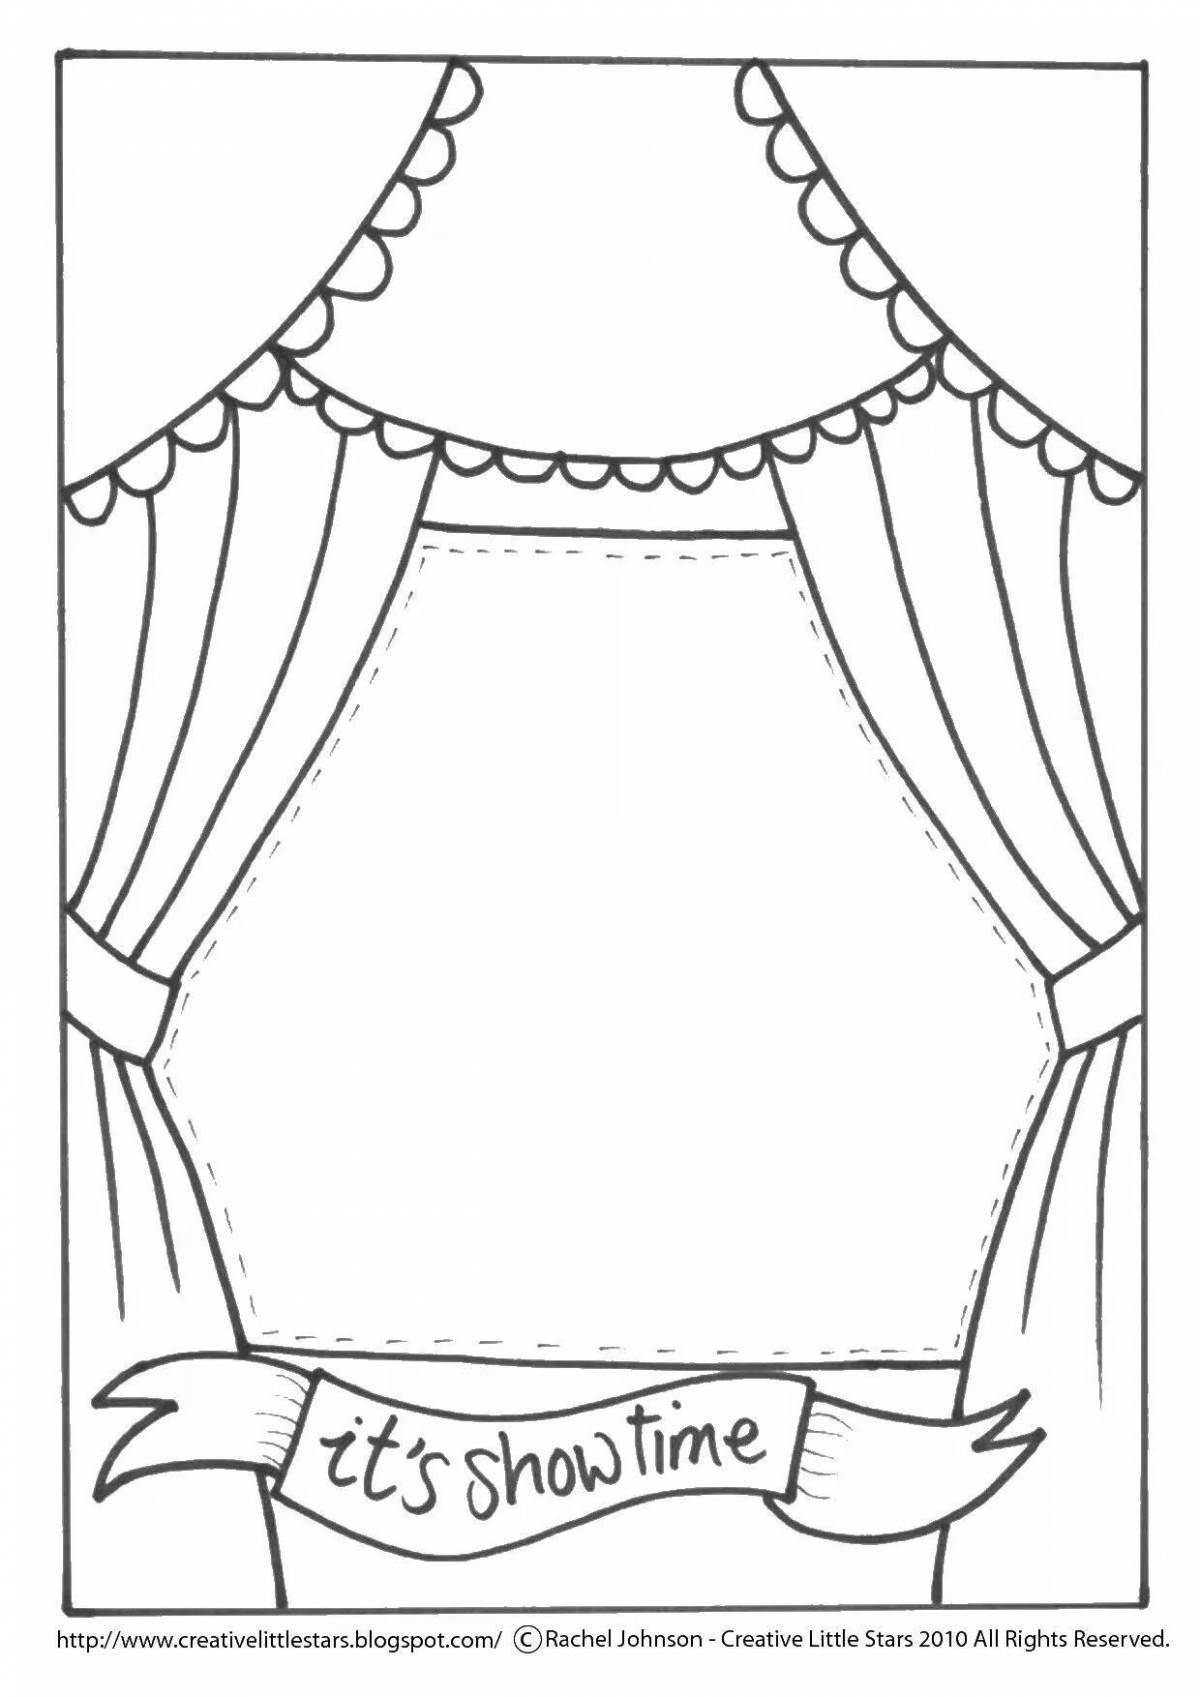 Coloring page cheerful theater scene